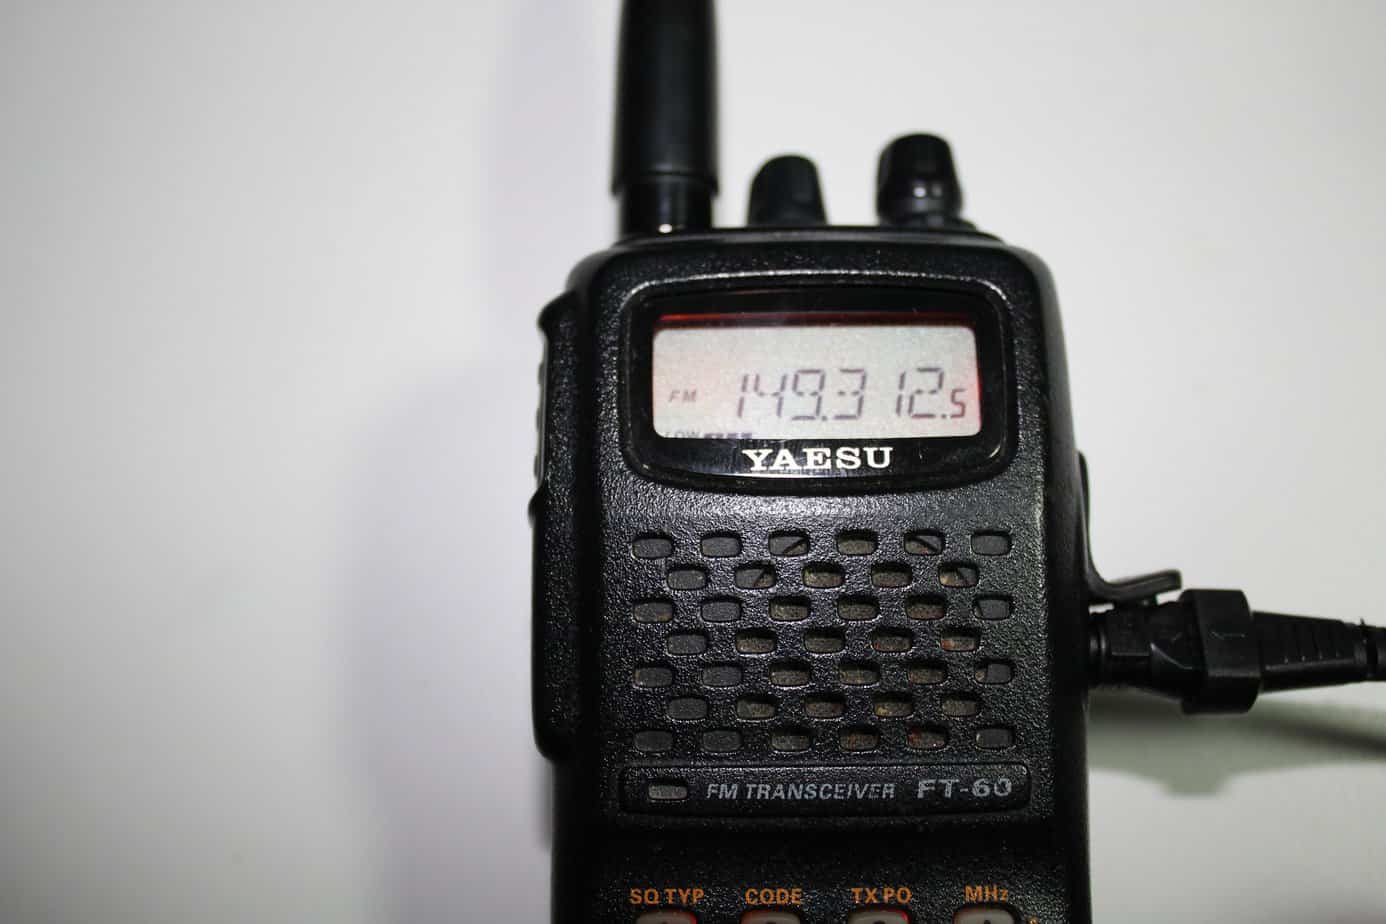 The BKR 9000: How Mobile Radio Can Improve Your Life